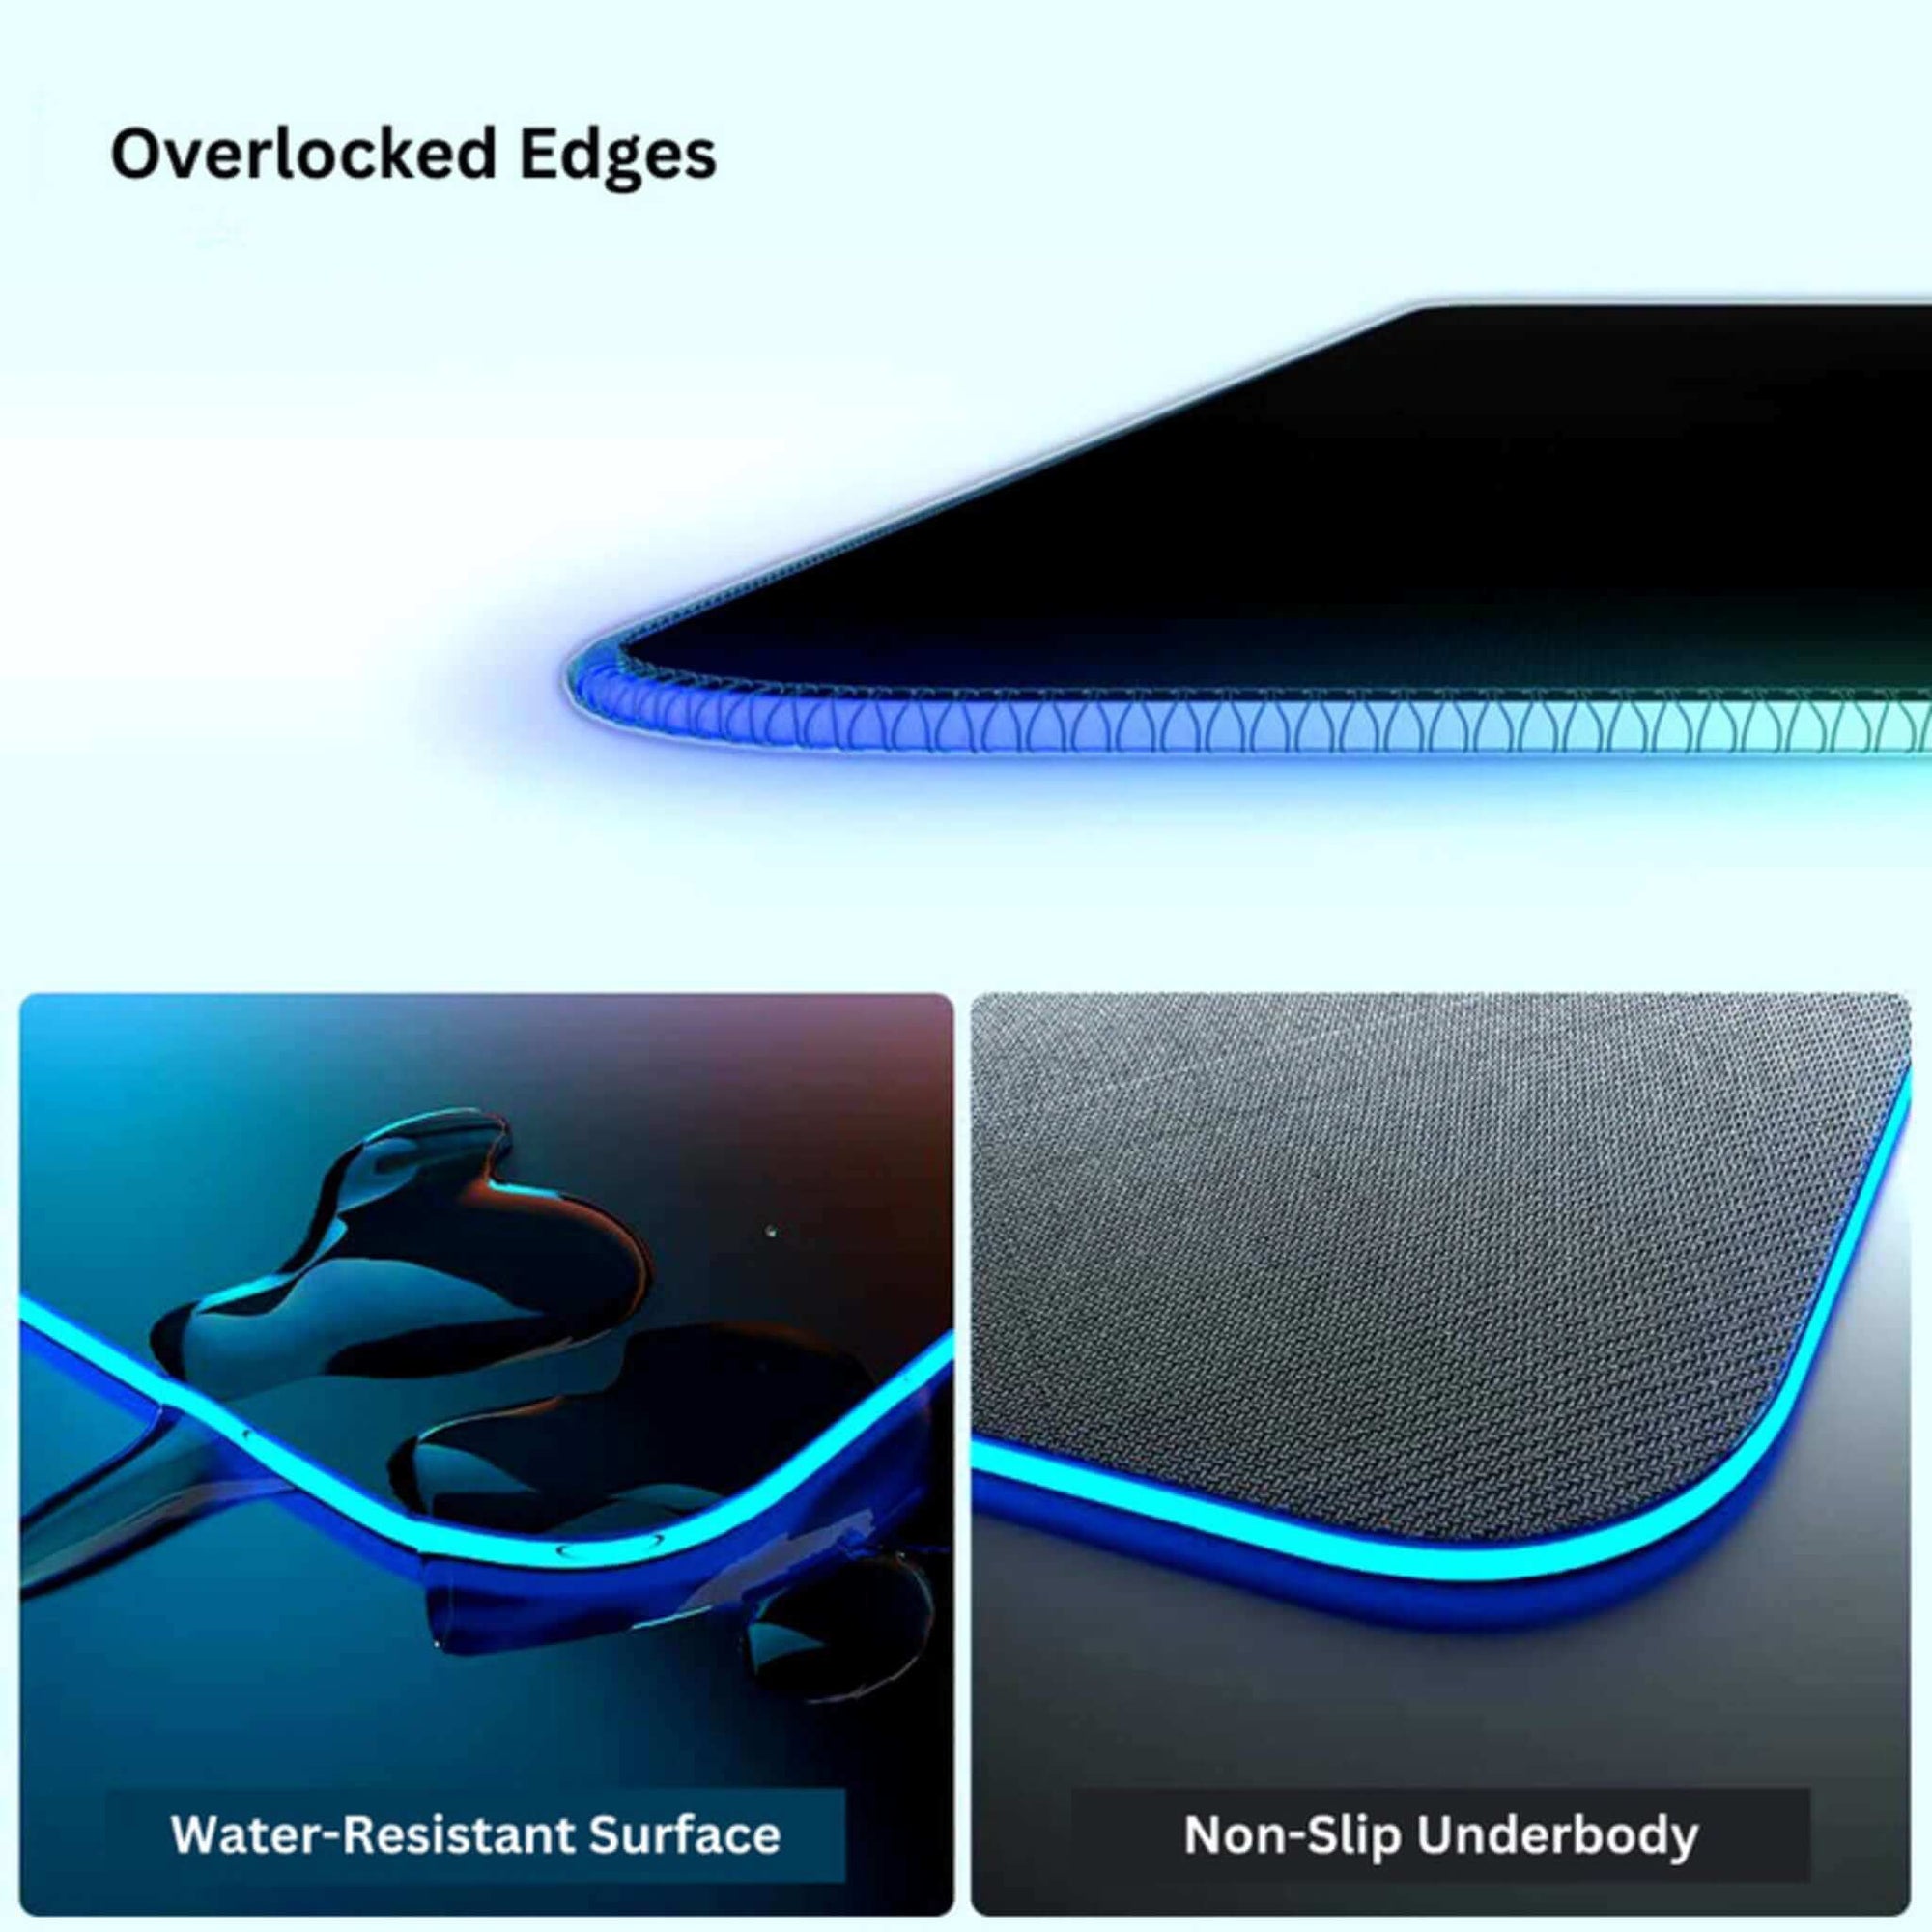 Black Obsidian Desk Mat showcasing its water resistance, rubber underbody, and overlocked stitching